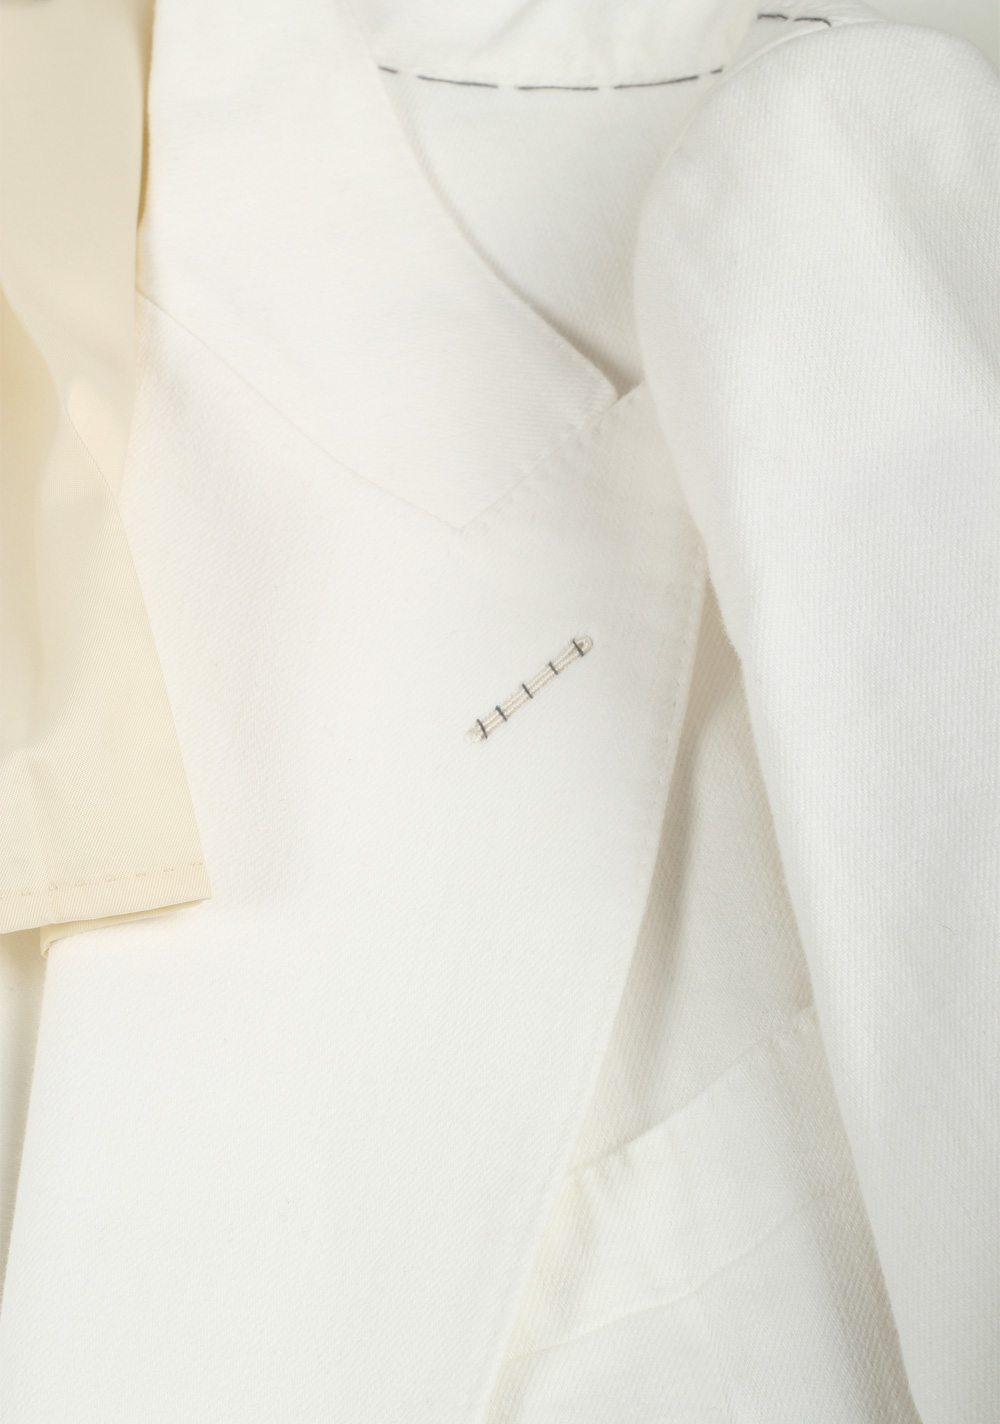 TOM FORD Washed Off White Sport Coat In Cotton In Size 56 / 46R U.S. | Costume Limité